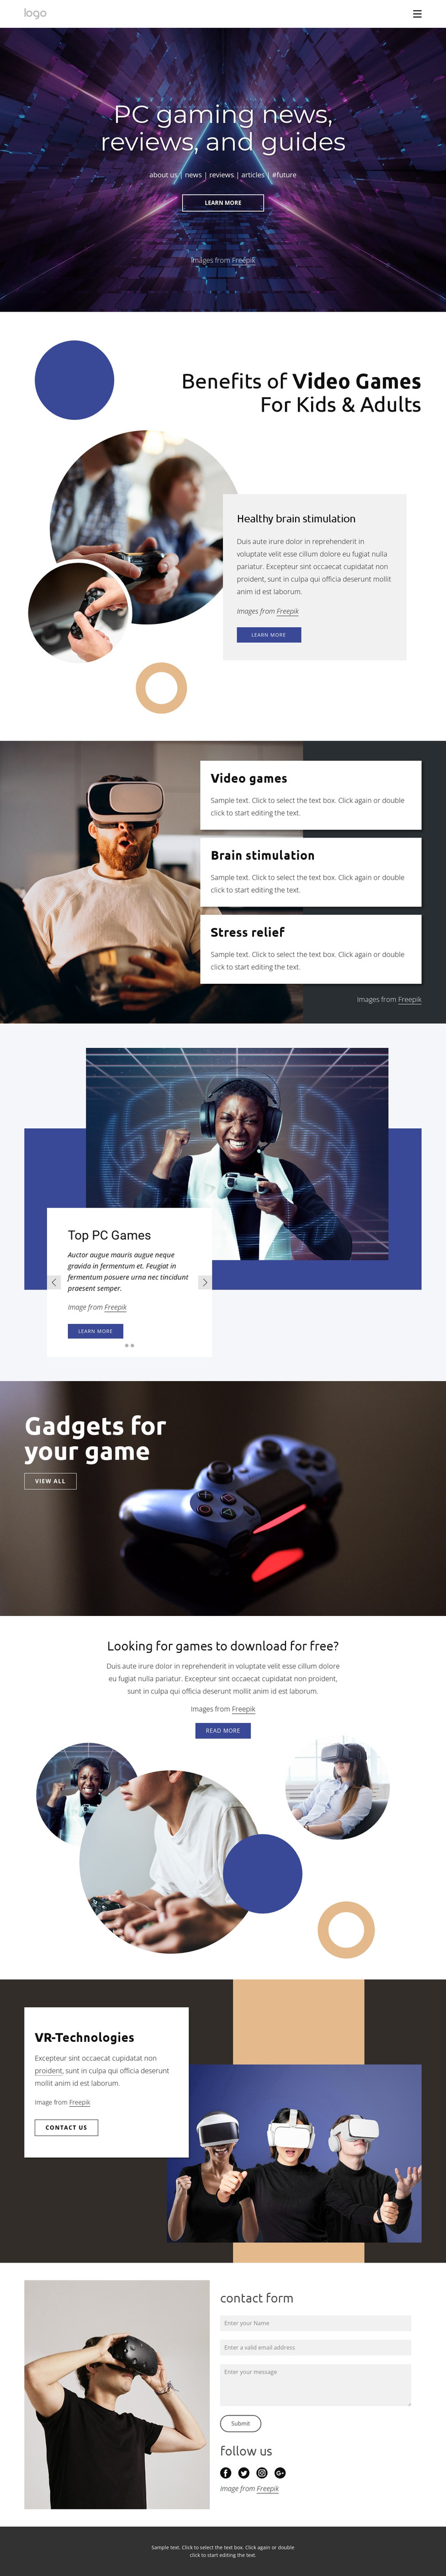 PC gaming news HTML5 Template